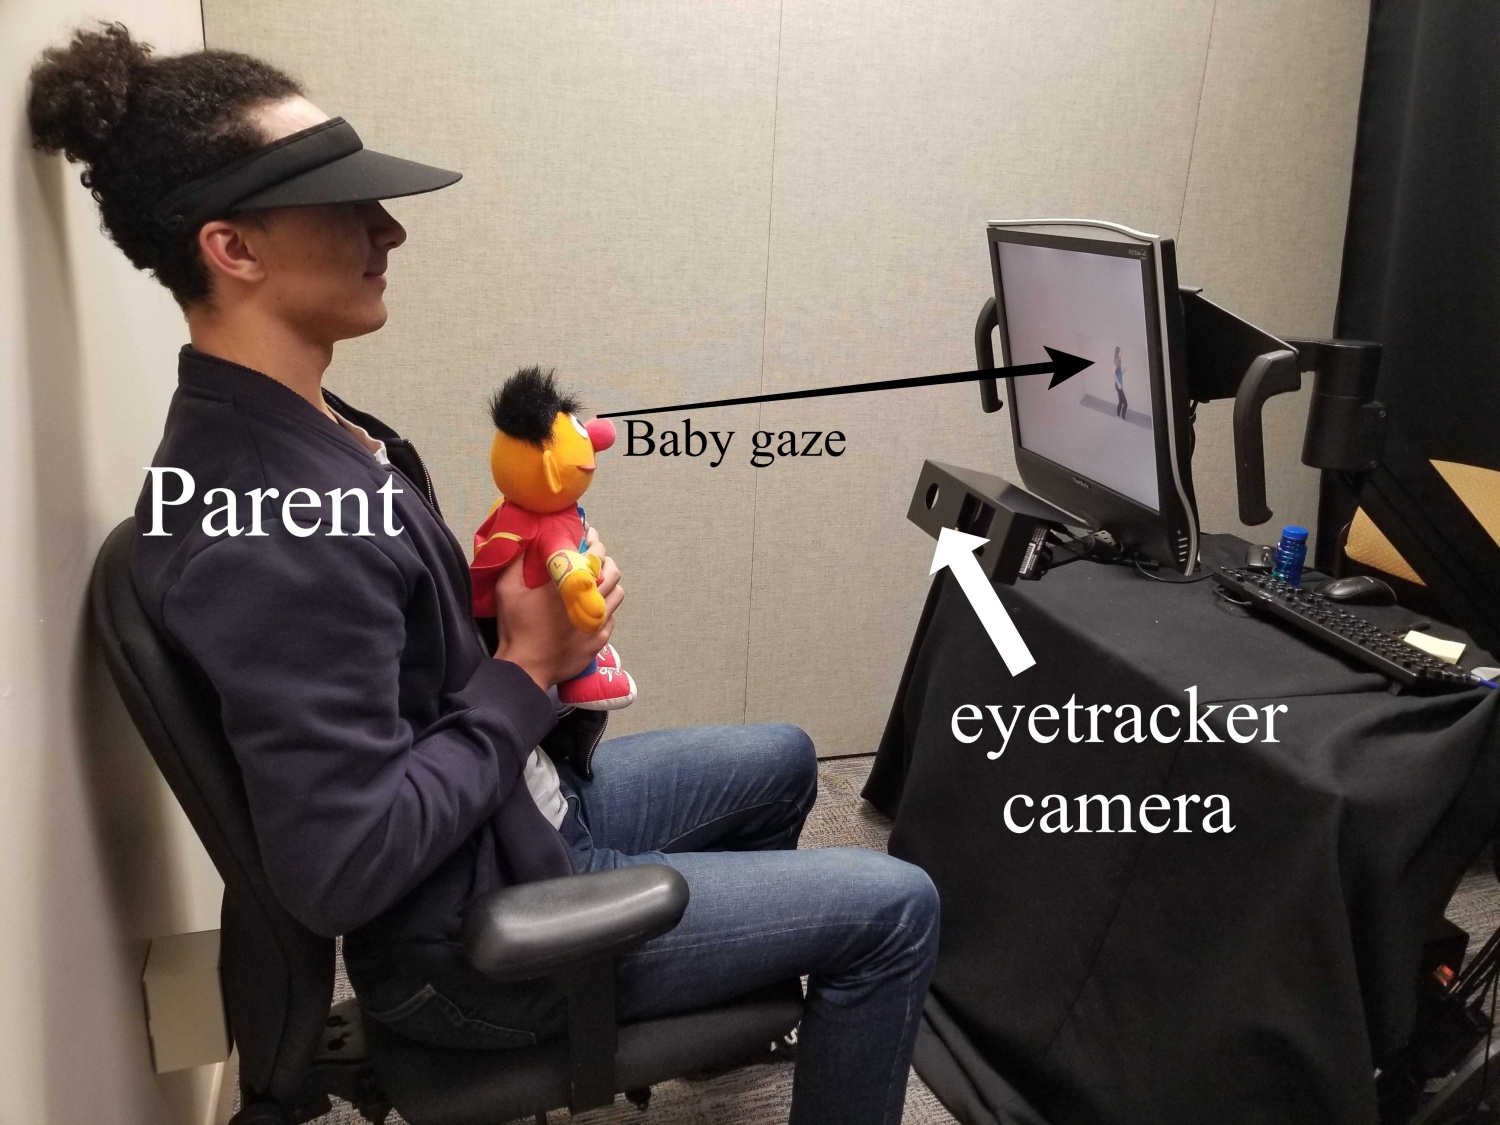 Aahnix holds an Elmo doll in front of the eye-tracking camera